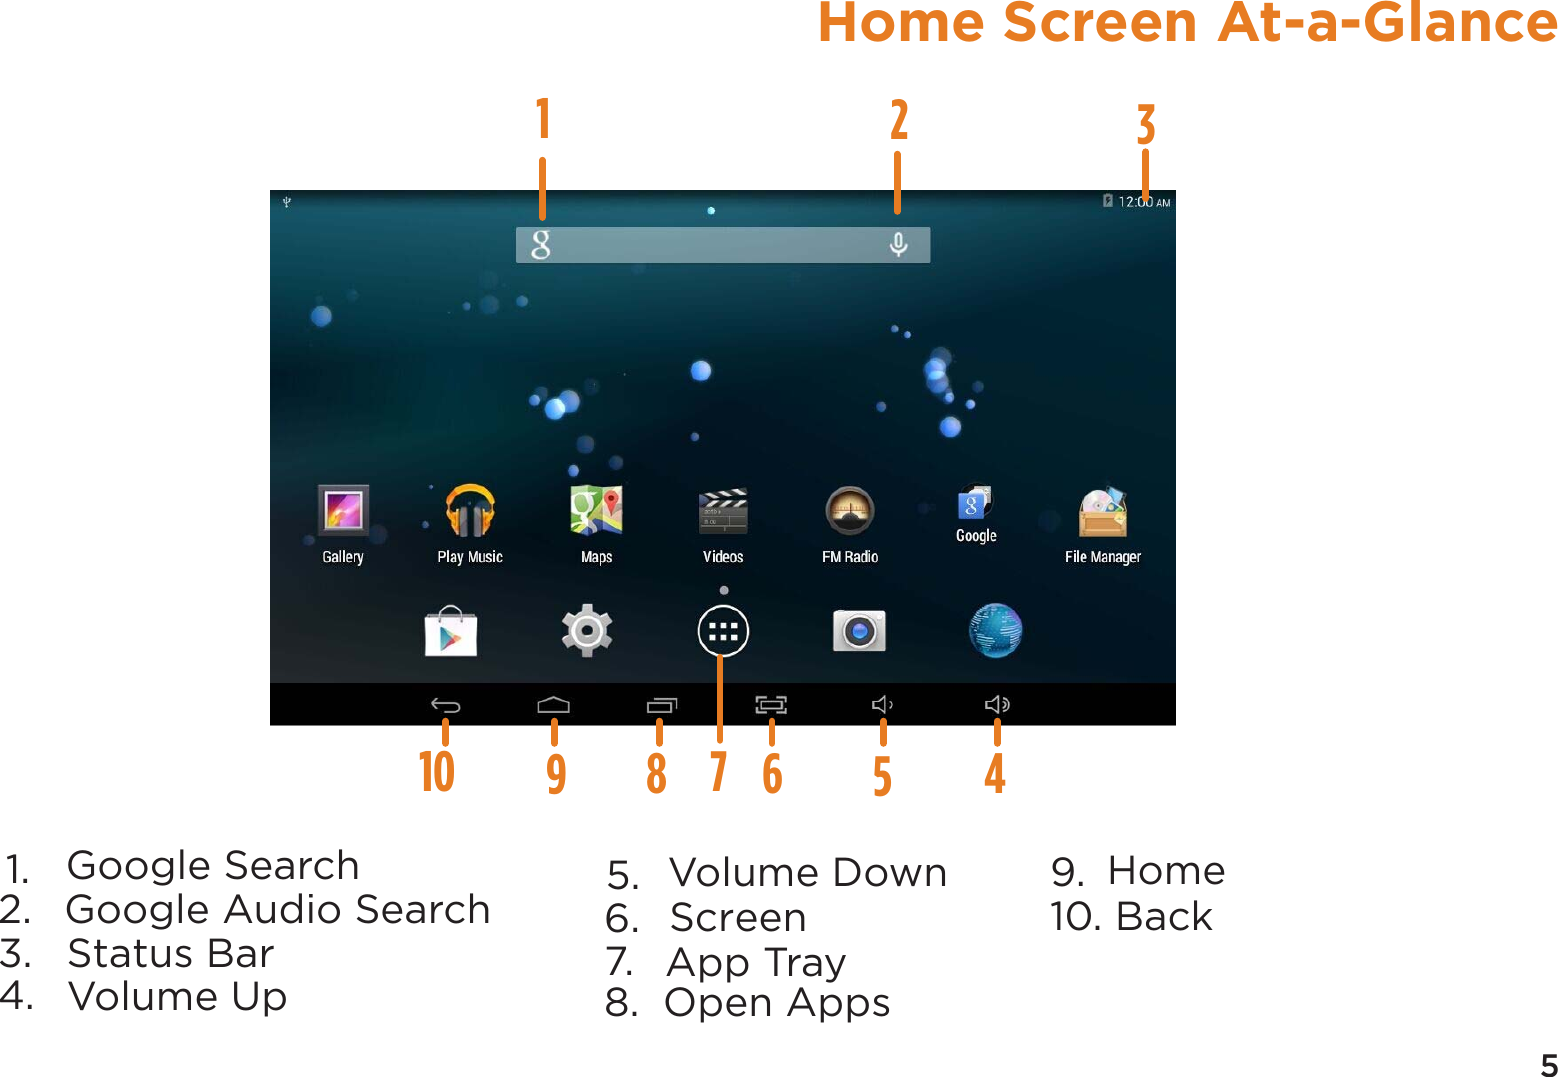 5Home Screen At-a-Glance143610 51.  2.  Google Search3.  Google Audio Search4.  Status Bar5.  6.  Screen7. Volume Up 8. Open Apps9.  Home10. BackVolume Down2987App Tray